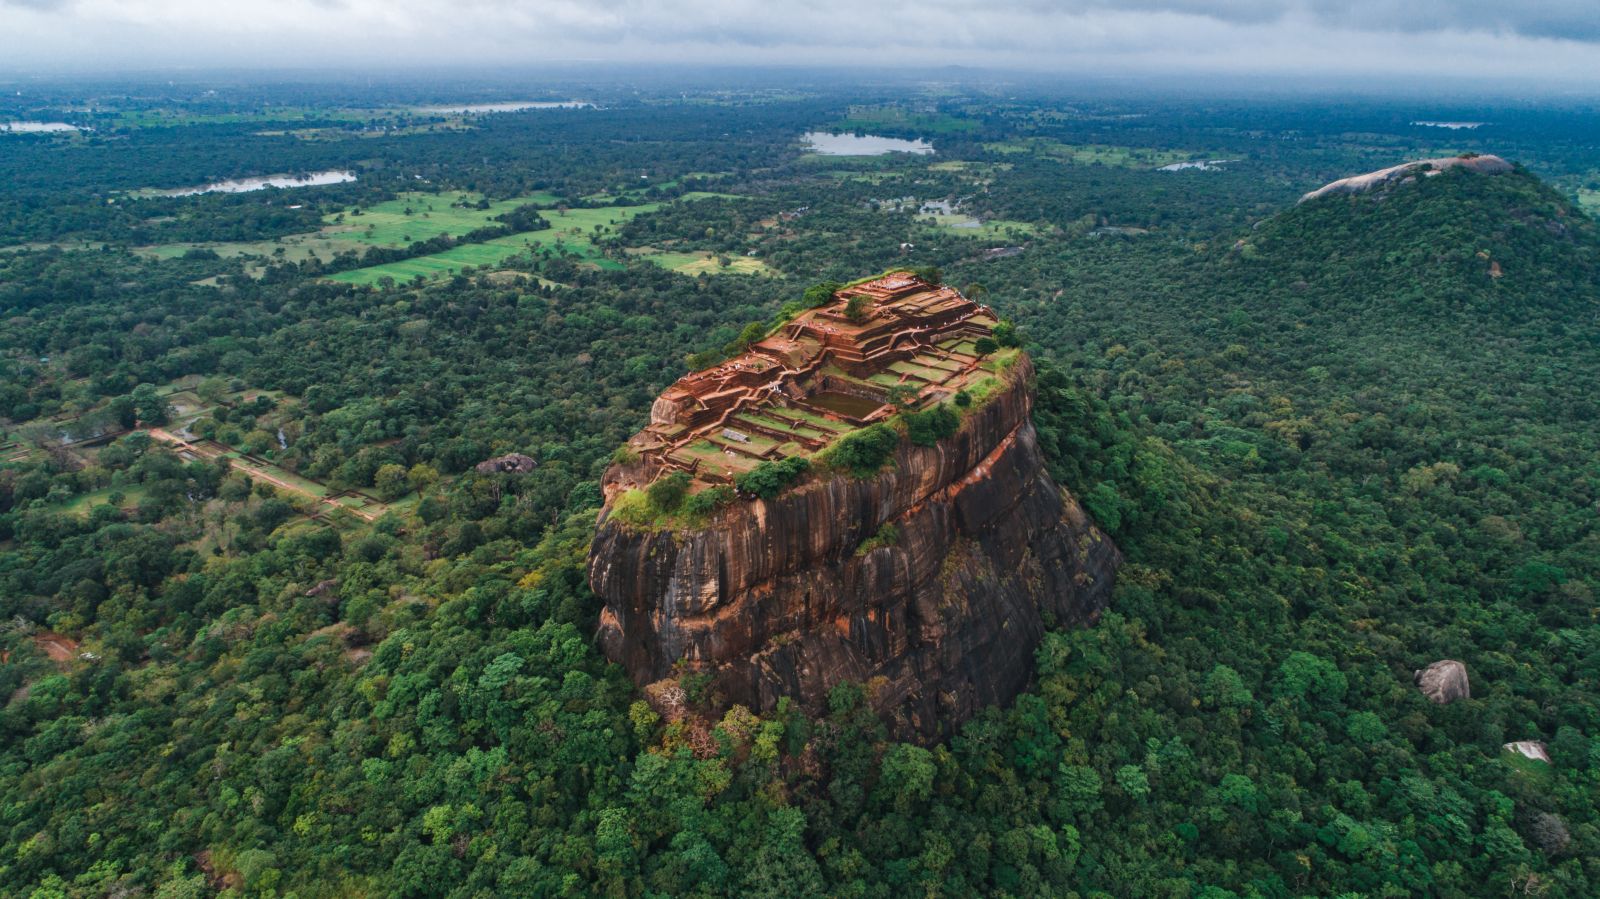 Aerial view of the Sigiriya fortress in Sri Lanka rising above the surrounding forests